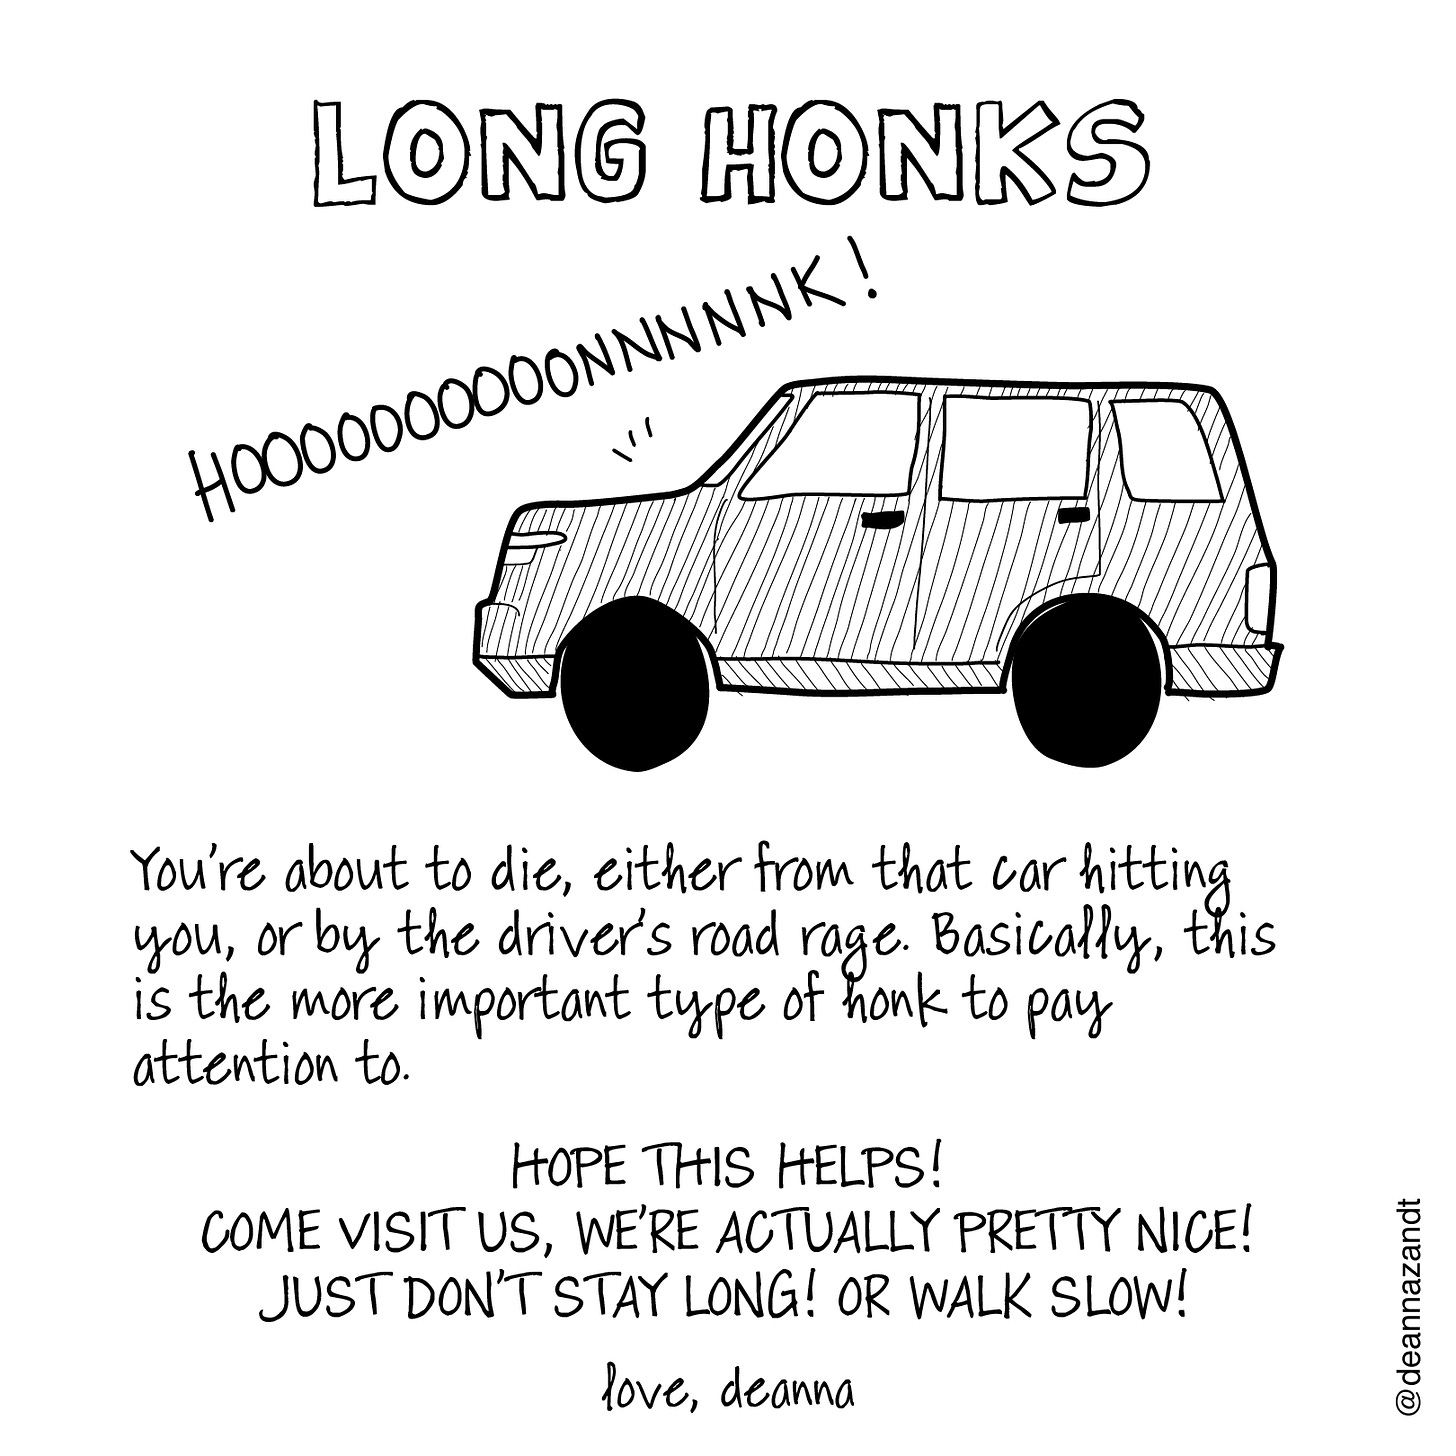 Slide 3: LONG HONKS. A line drawing of a large SUV with the word, "HOOOOOOOONNNNK!" coming from its hood. This text is below it: You’re about to die, either from that car hitting you, or by the driver’s road rage. Basically, this is the more important type of honk to pay attention to.   HOPE THIS HELPS! COME VISIT US, WE’RE ACTUALLY PRETTY NICE! JUST DON’T STAY LONG! OR WALK SLOW!  love, deanna